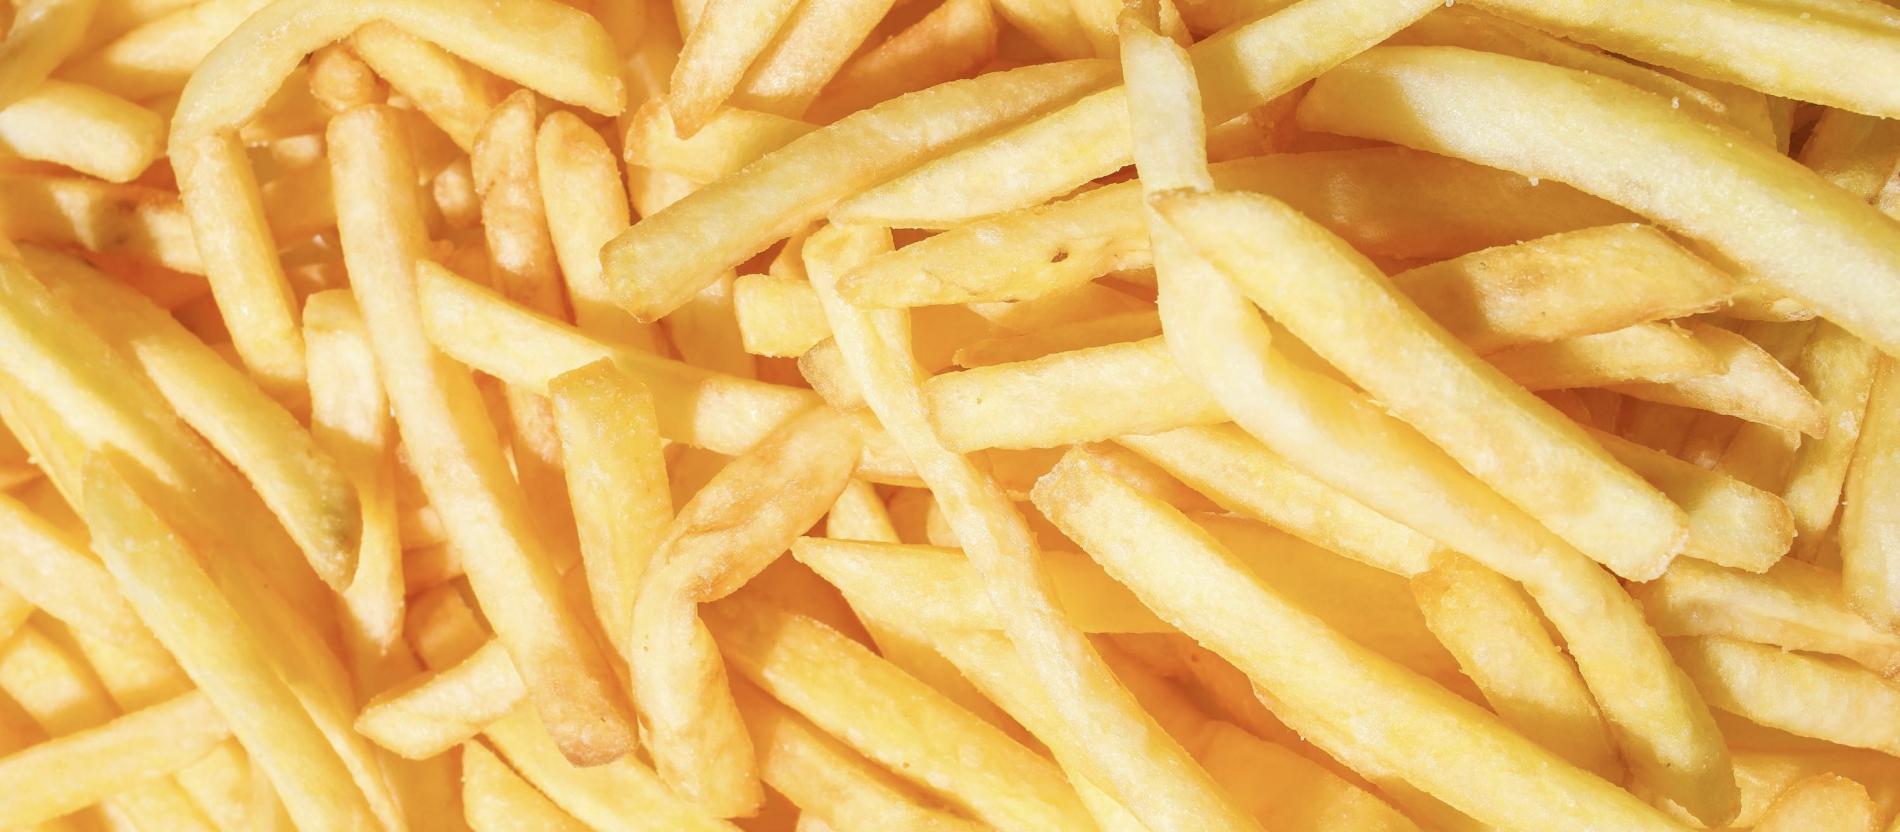 Zoomed-in image of french fries.